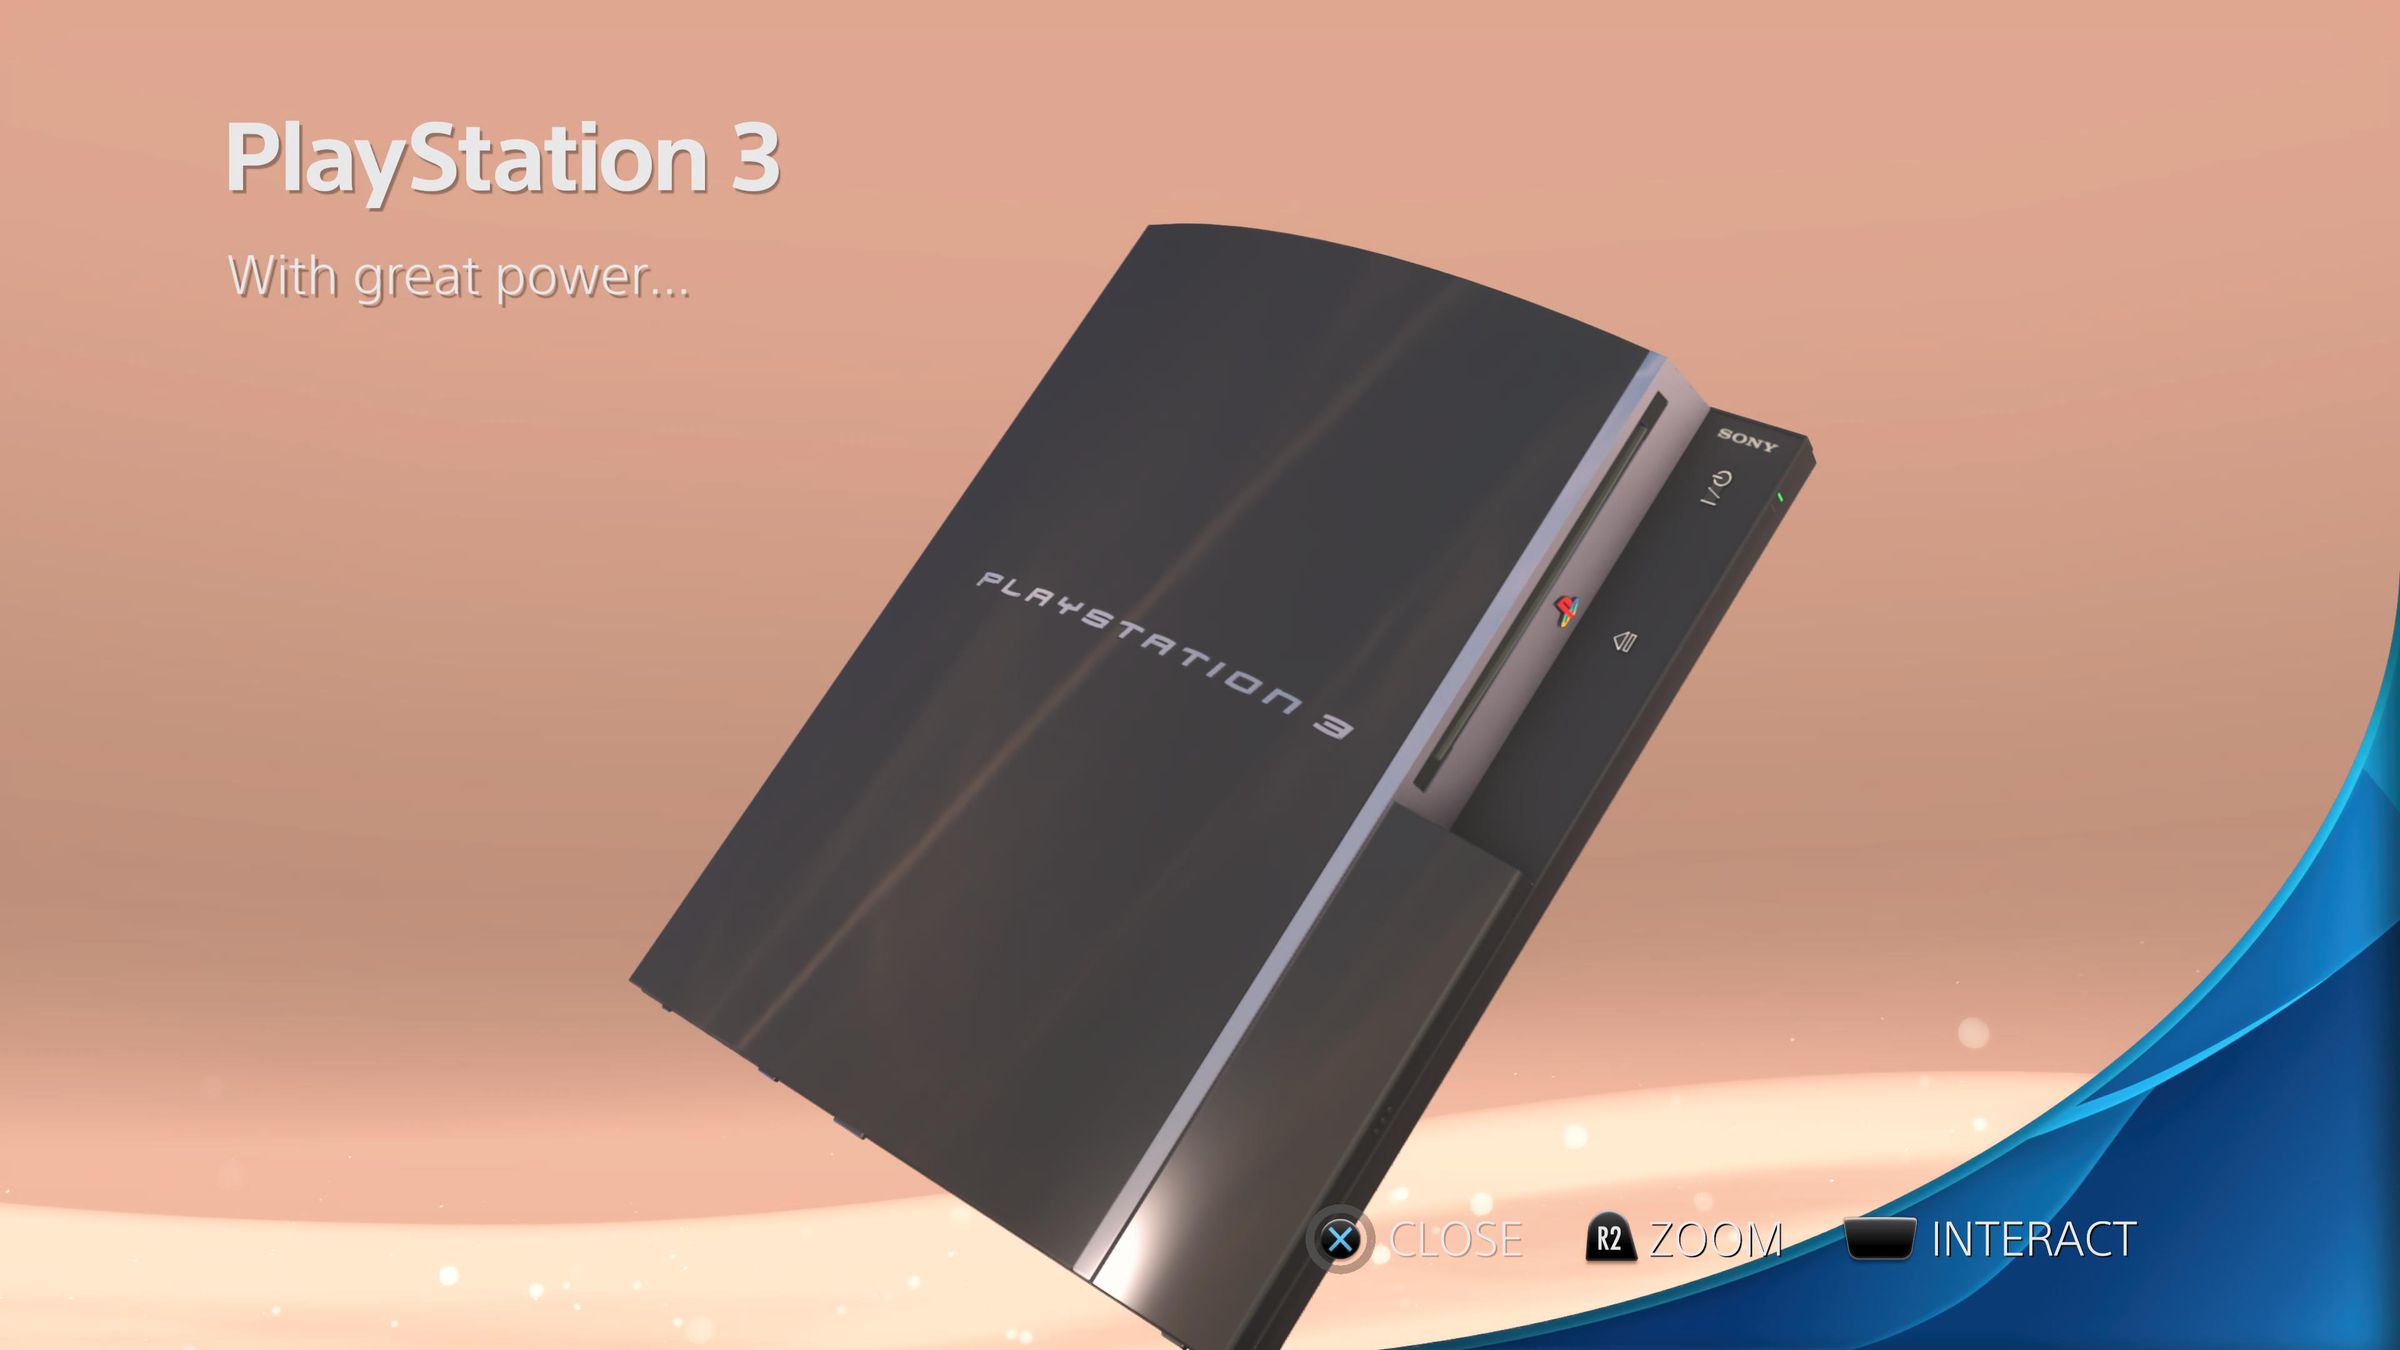 Poking fun at Sony’s use of the Spider-Man font for its original PS3.